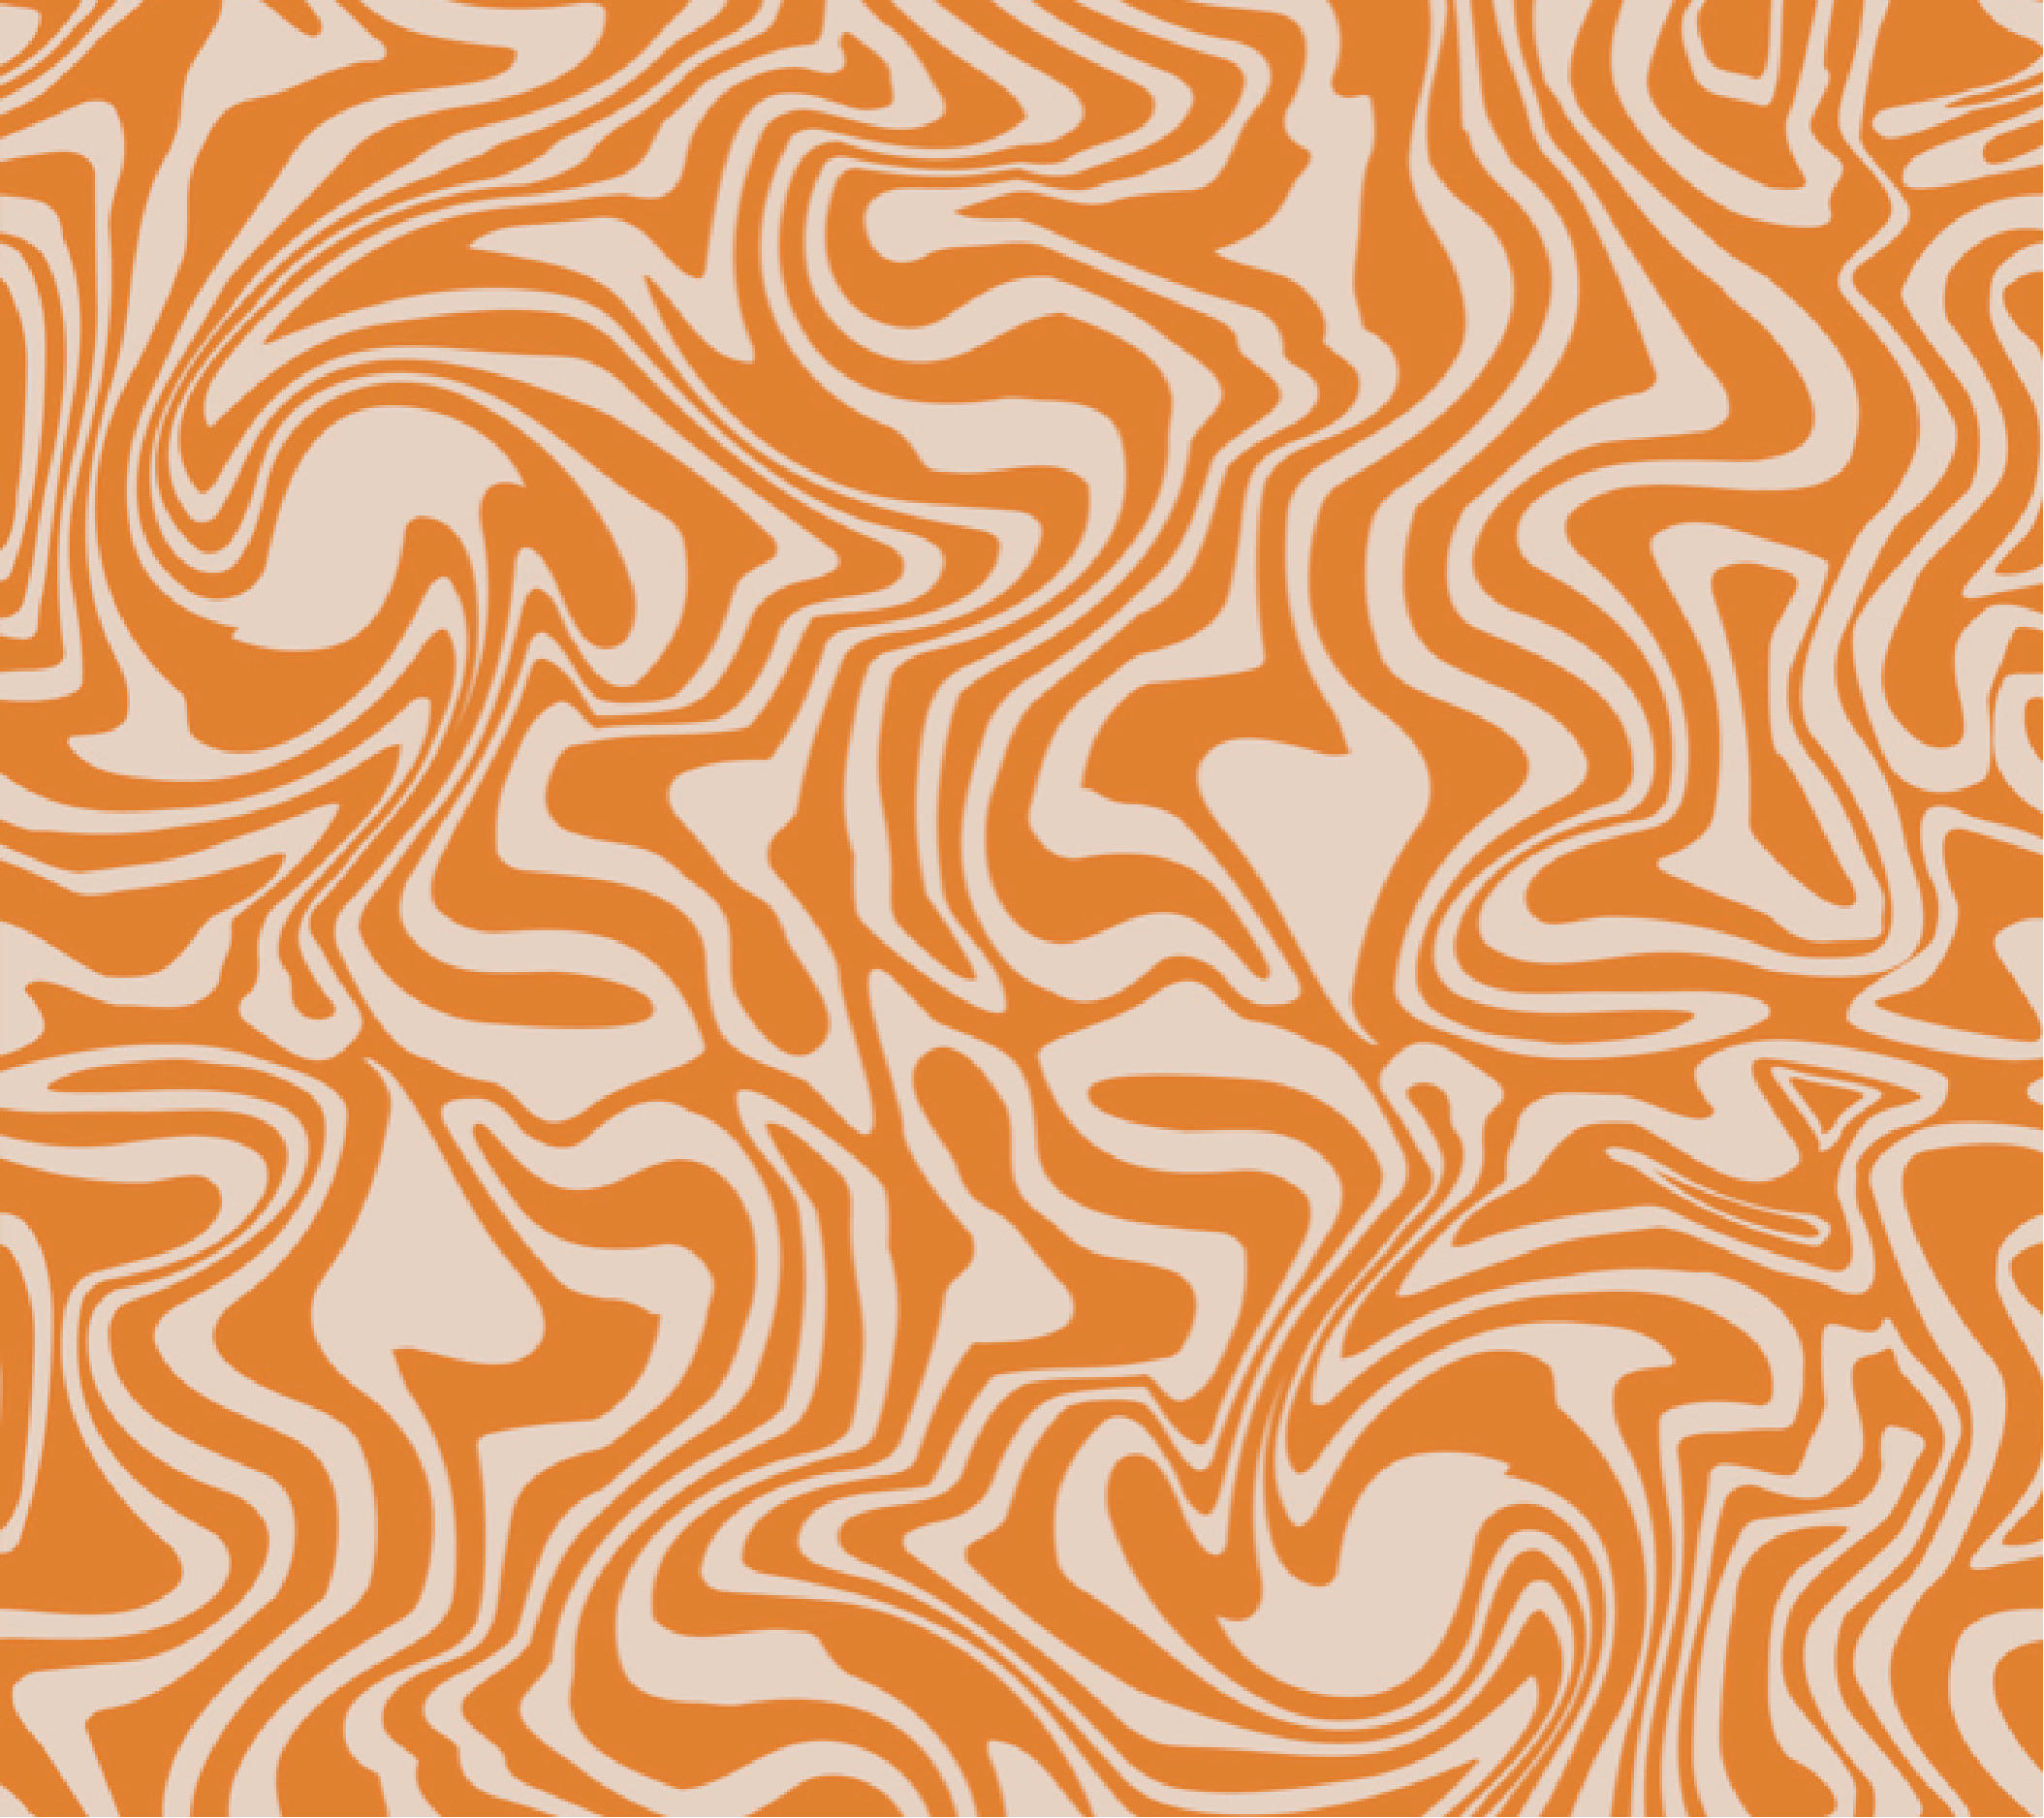 70s Retro Wavy Pattern Wallpaper ,Peel and Stick,Removable Wallpaper